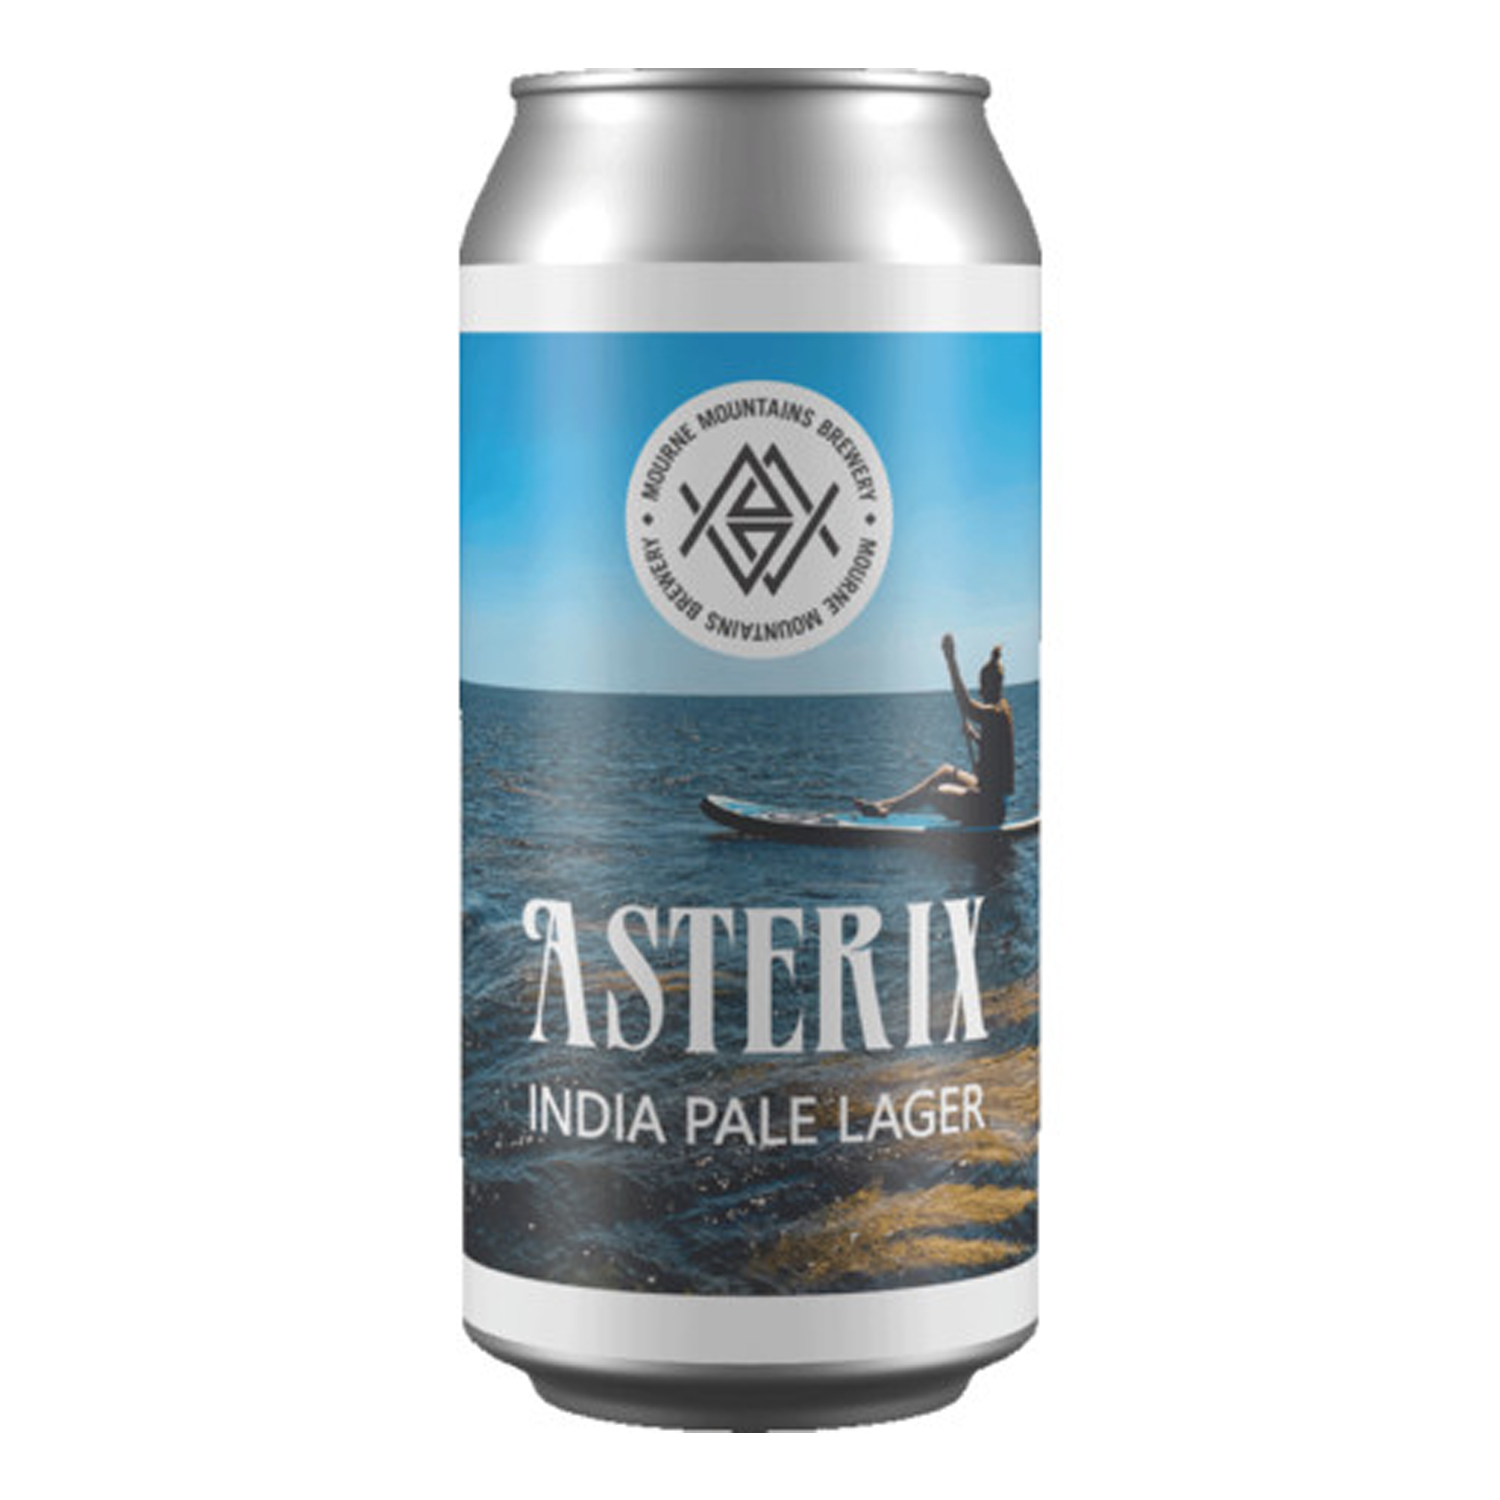 Mourne Mountains Asterix India Pale Lager